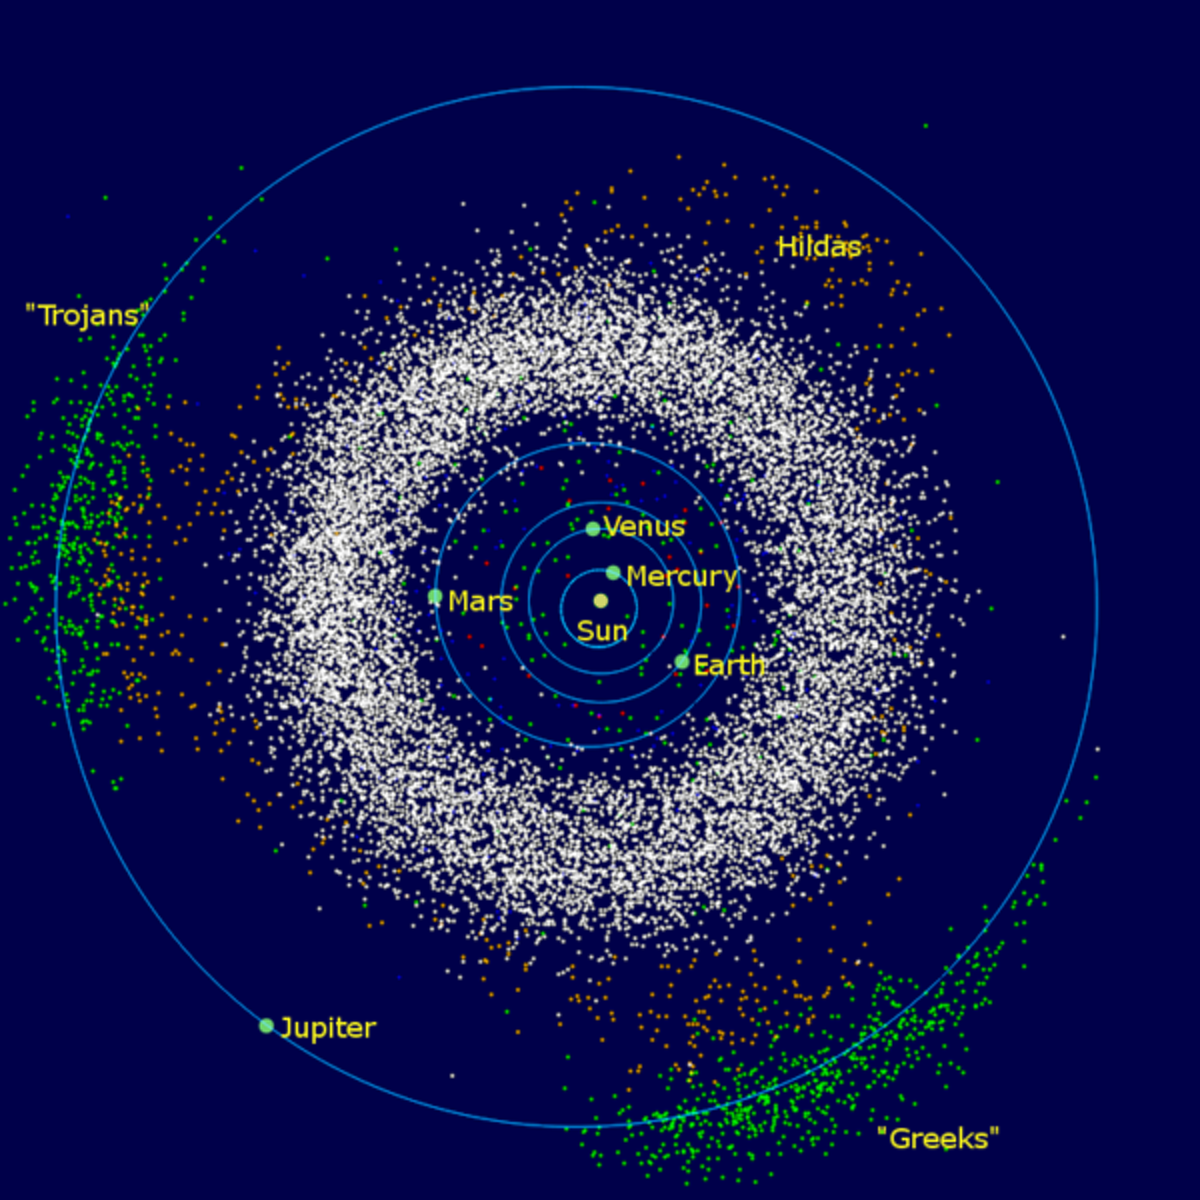 Asteroid positions in our solar system, with Jupiter’s Trojans in green